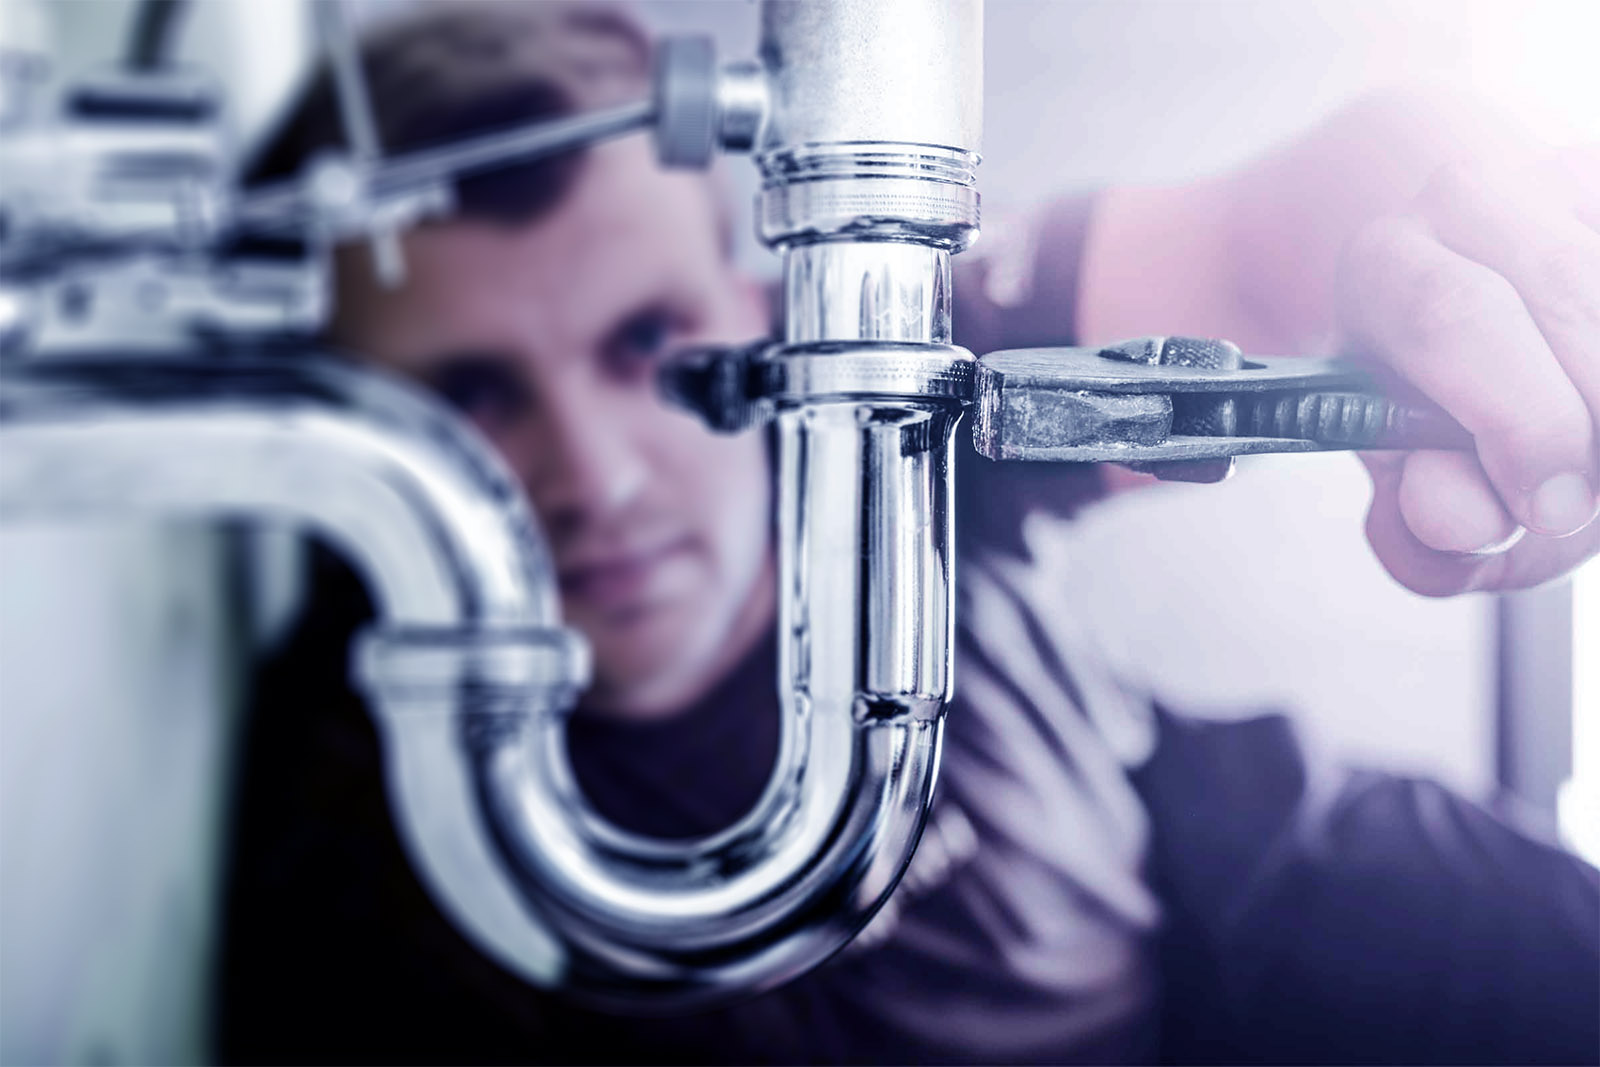 Reliable Plumbing Services 